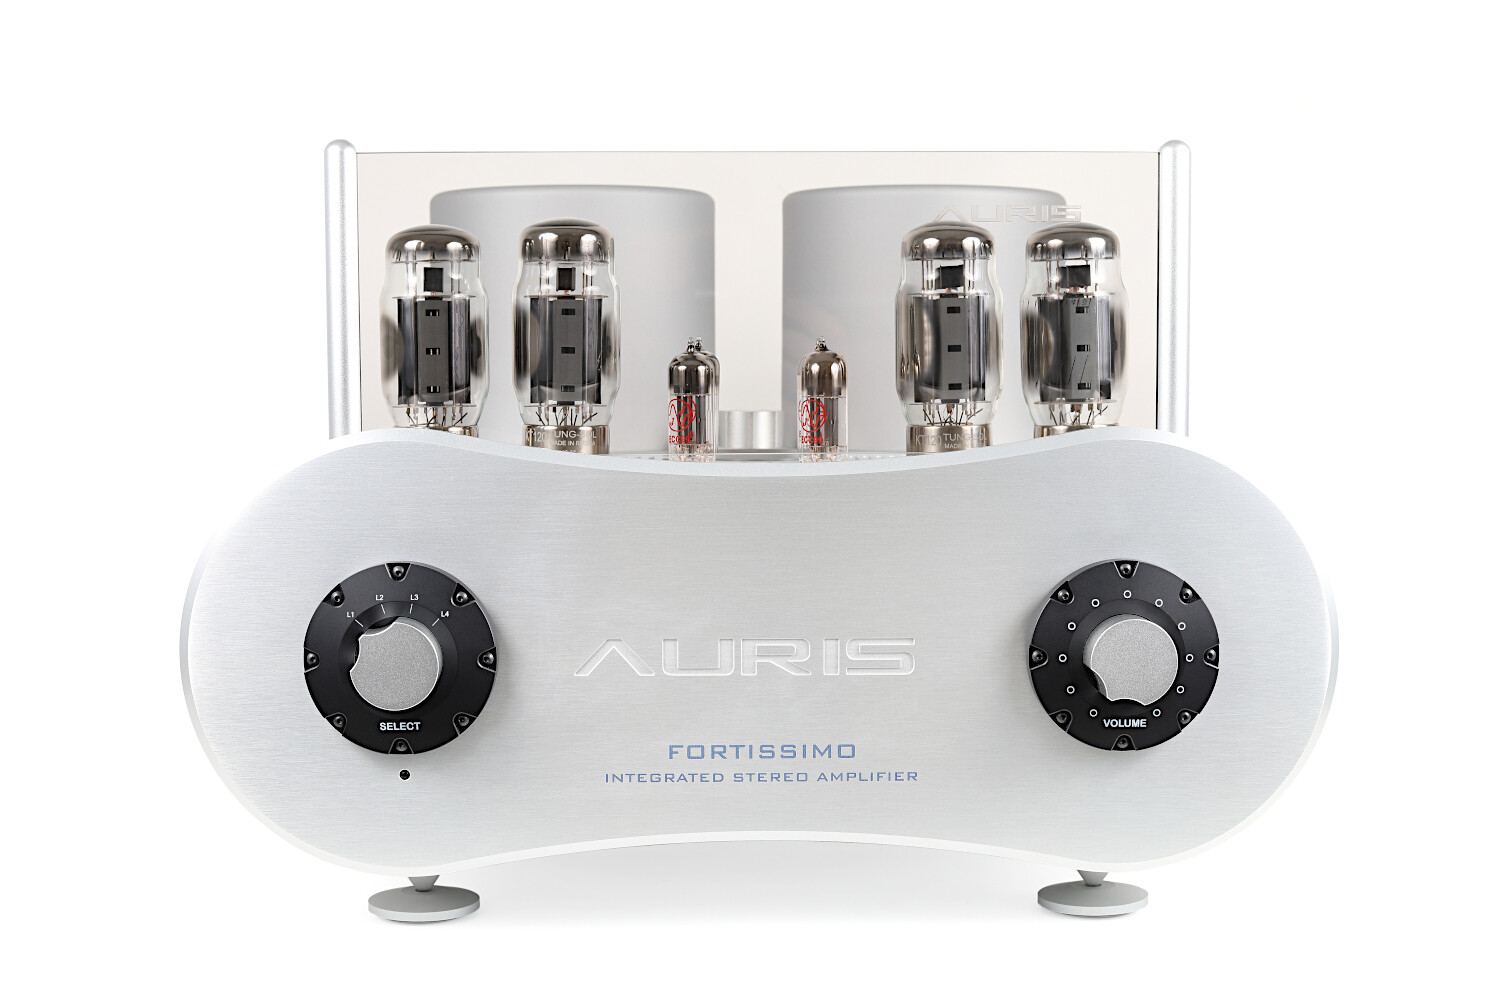 Auris FORTISSIMO Integrated Stereo Tube Amplifier